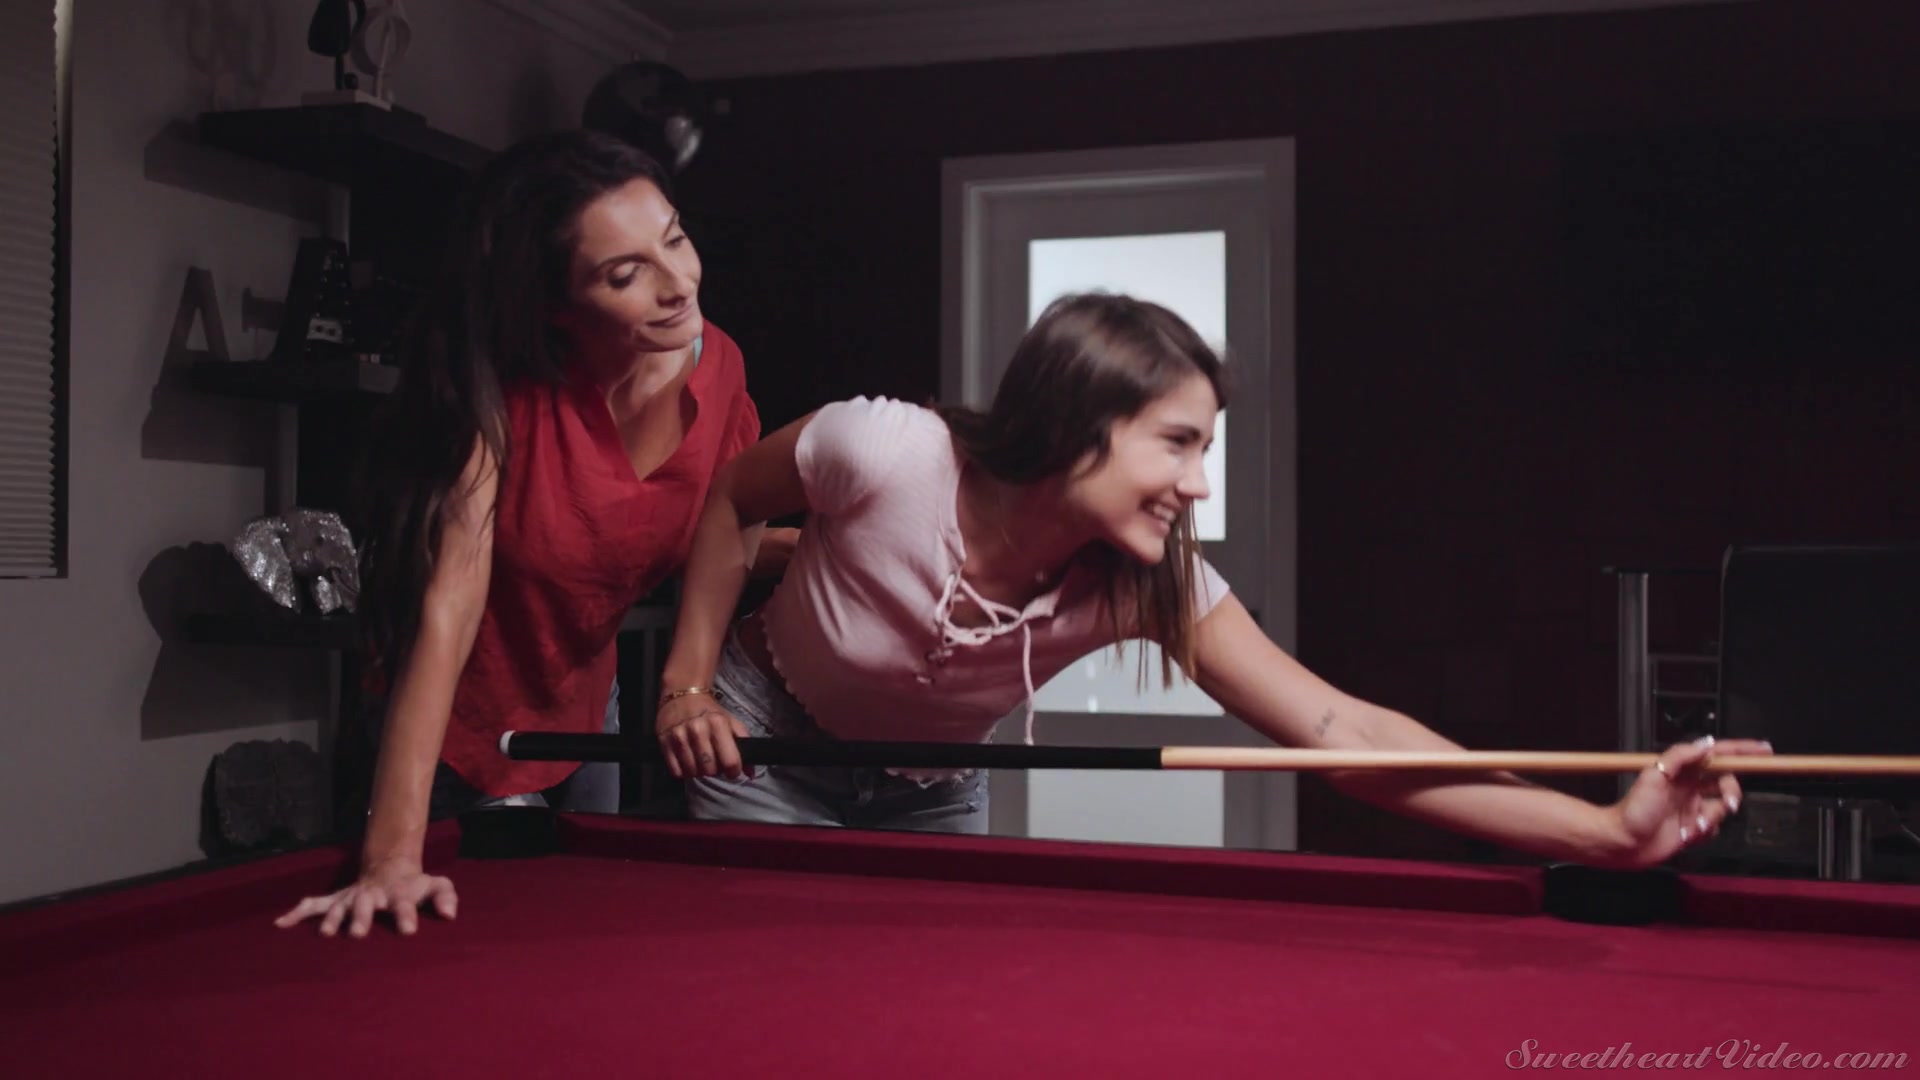 Lesbian love making on the pool table